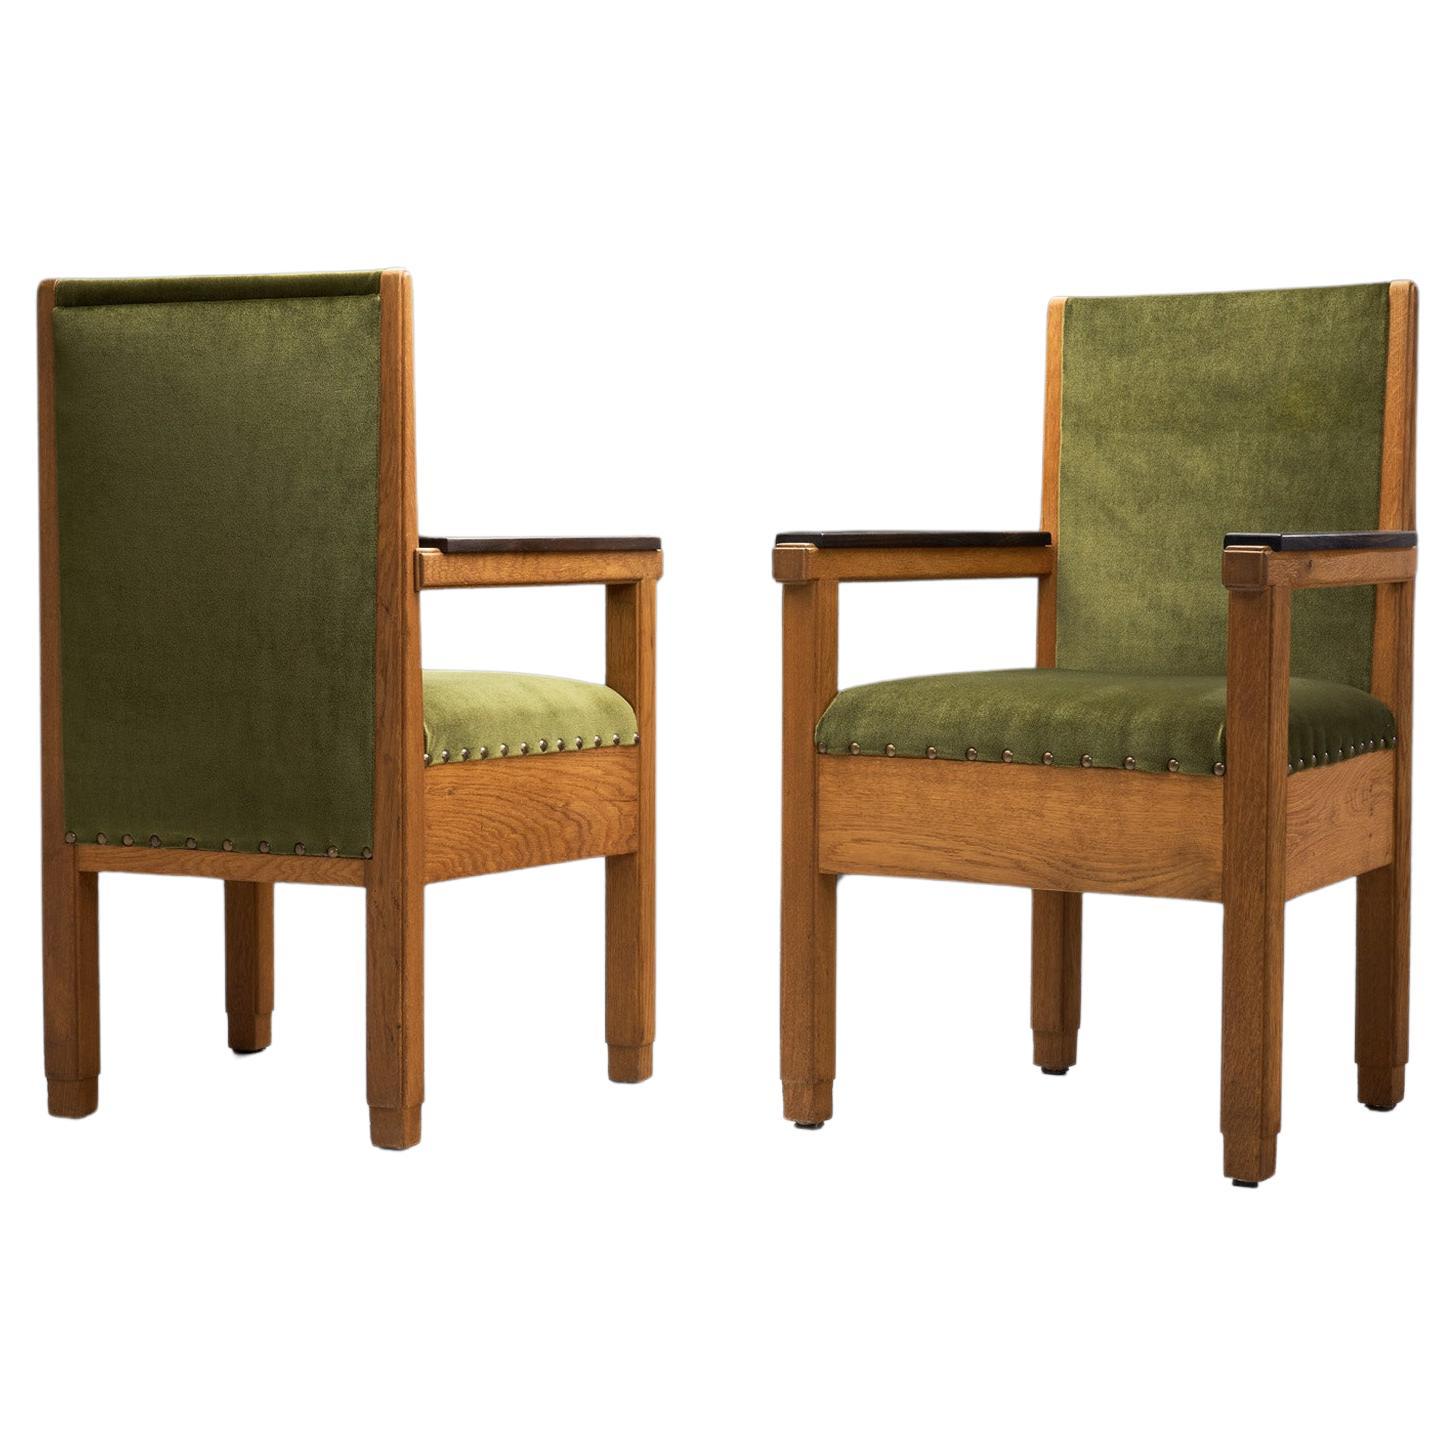 Upholstered Amsterdamse School Chairs, The Netherlands Early 20th Century For Sale